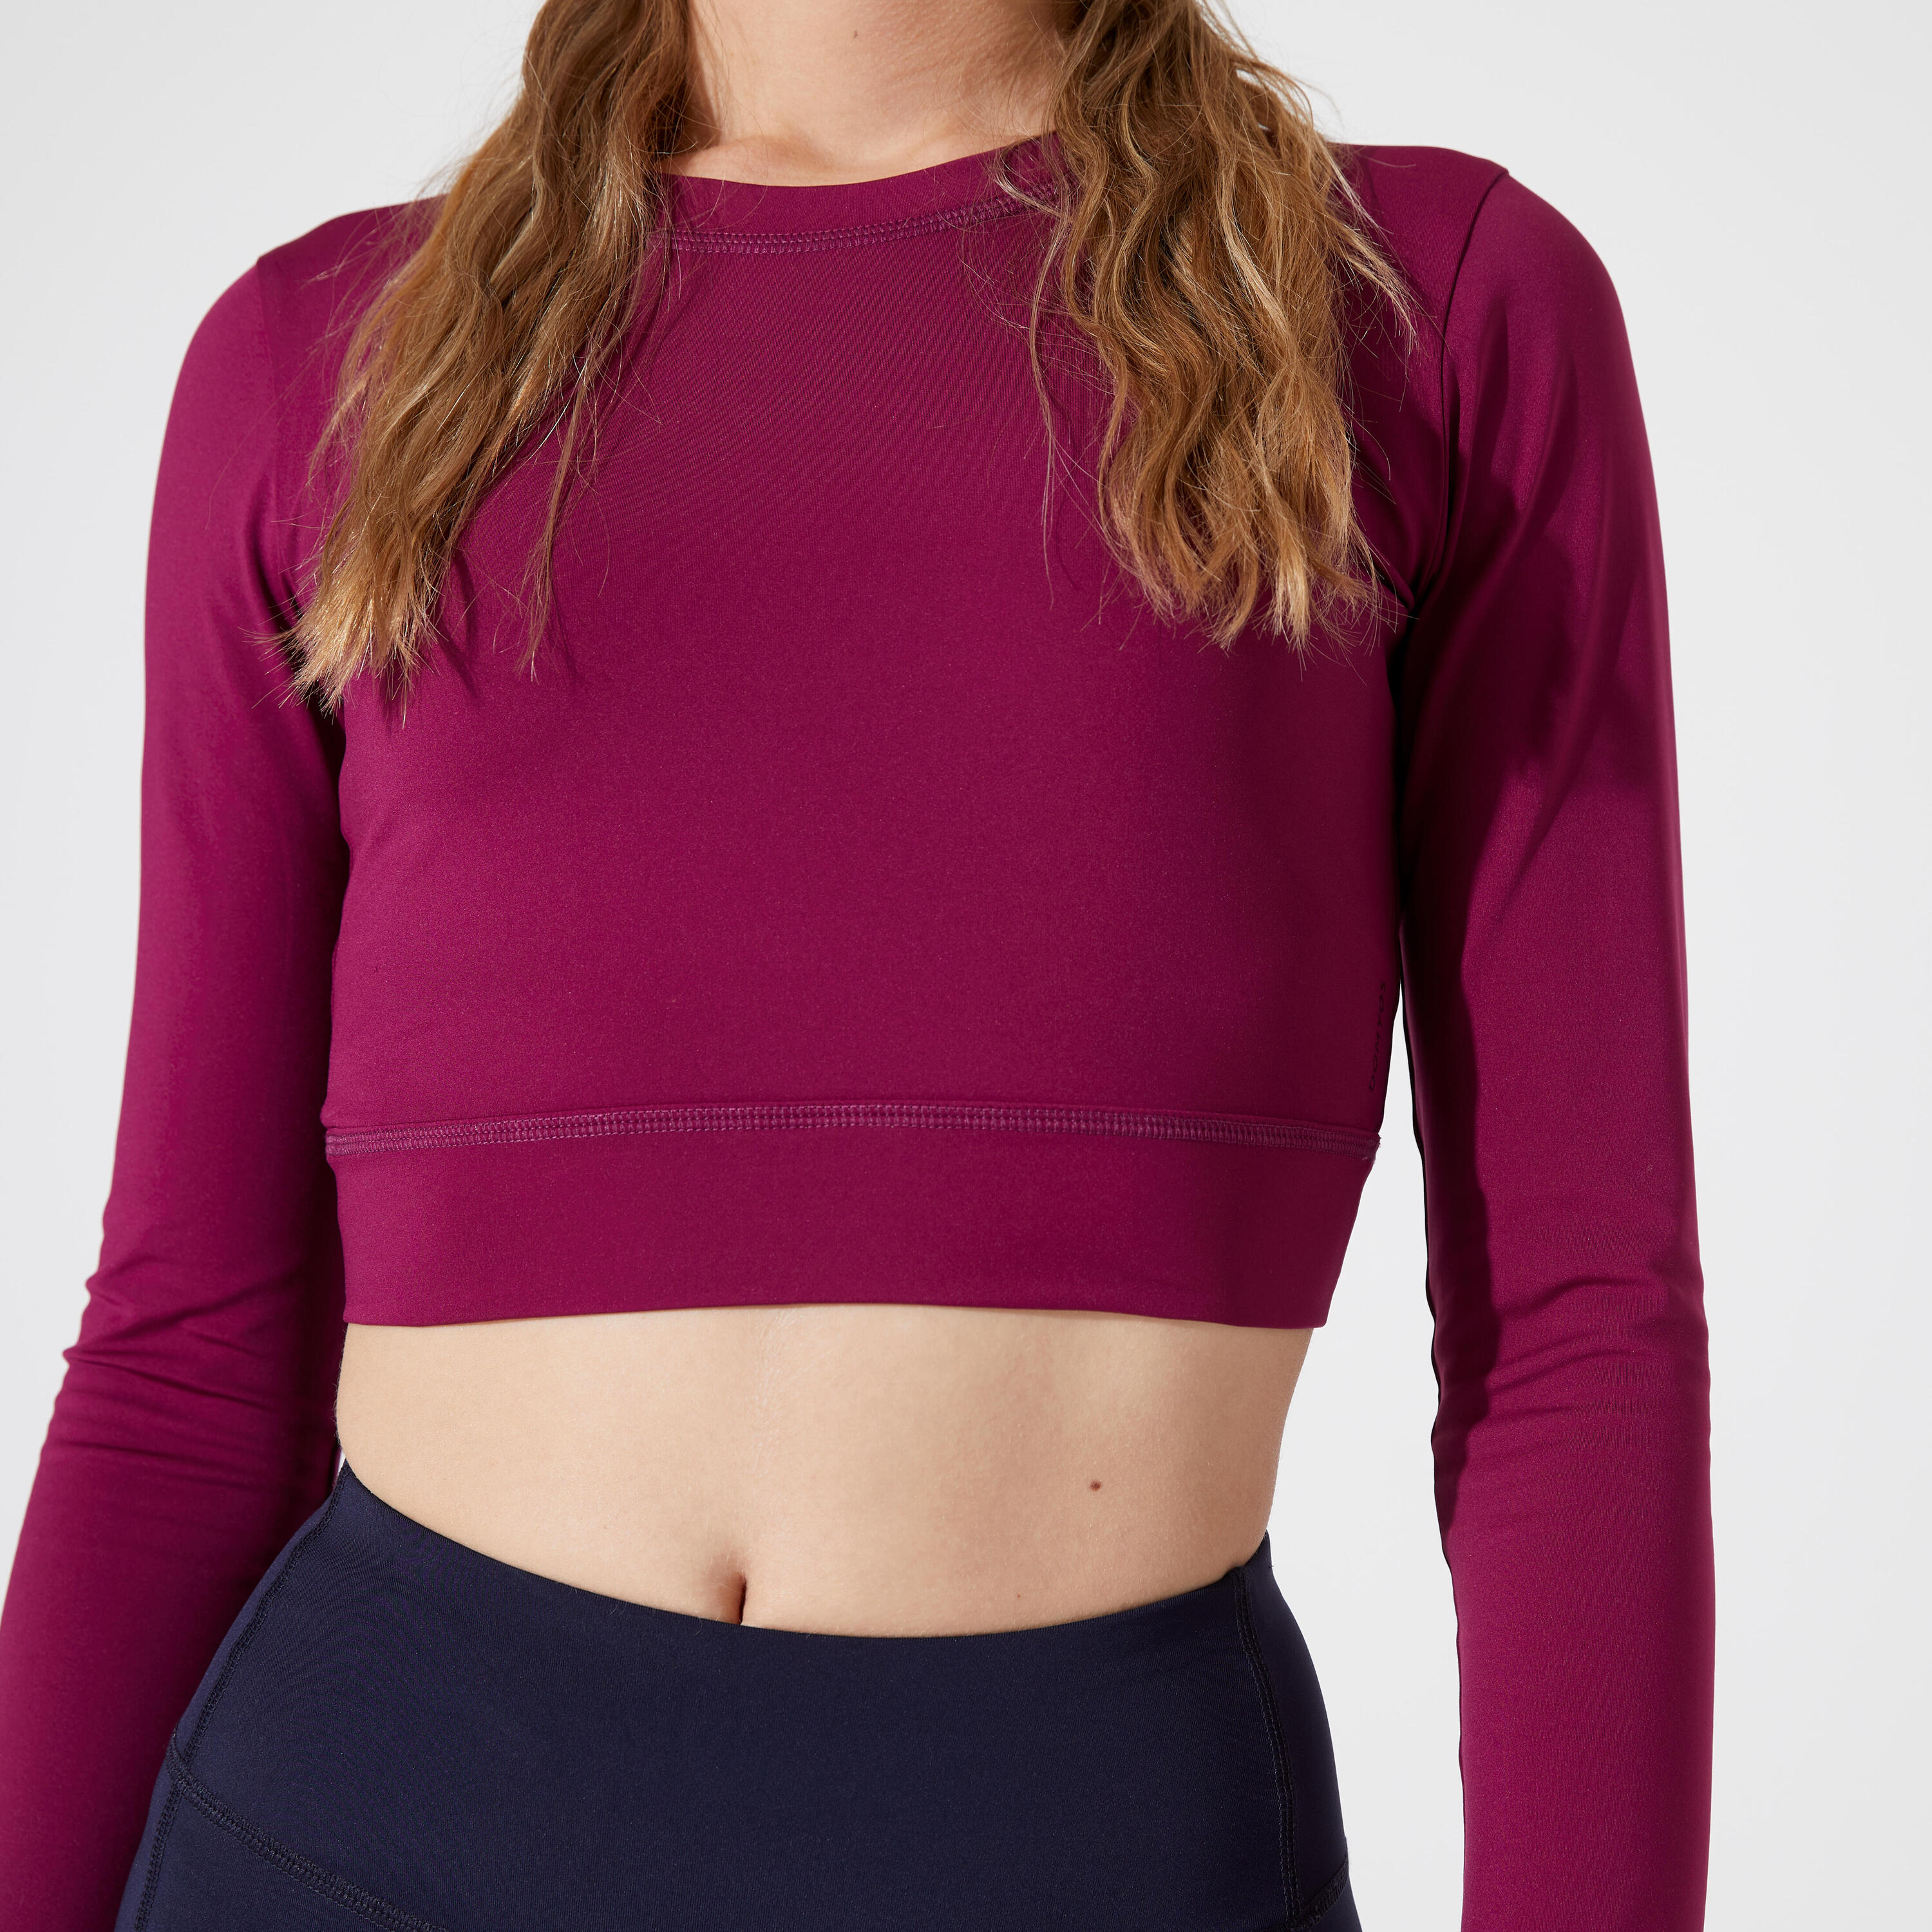 Women's Fitness Long-Sleeved Cropped T-Shirt - Purple 5/5